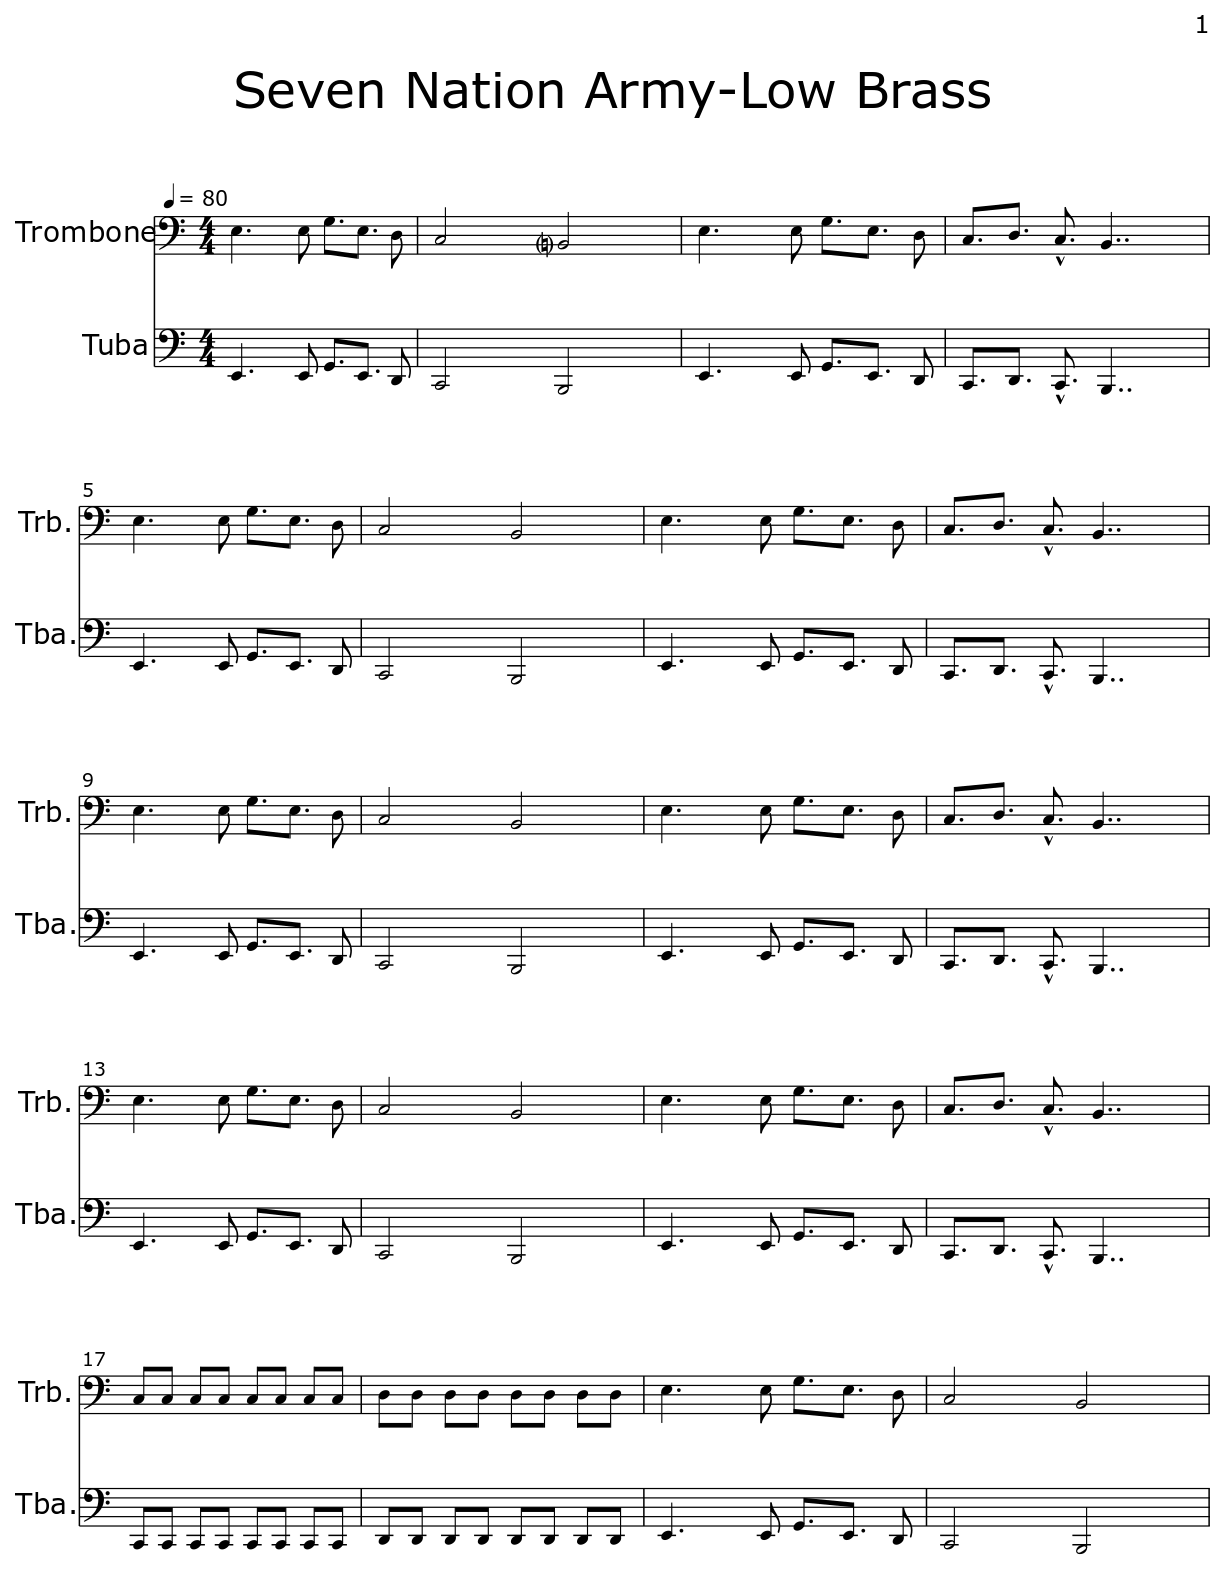 Seven Nation Army-Low Brass - Sheet music for Trombone, Tuba